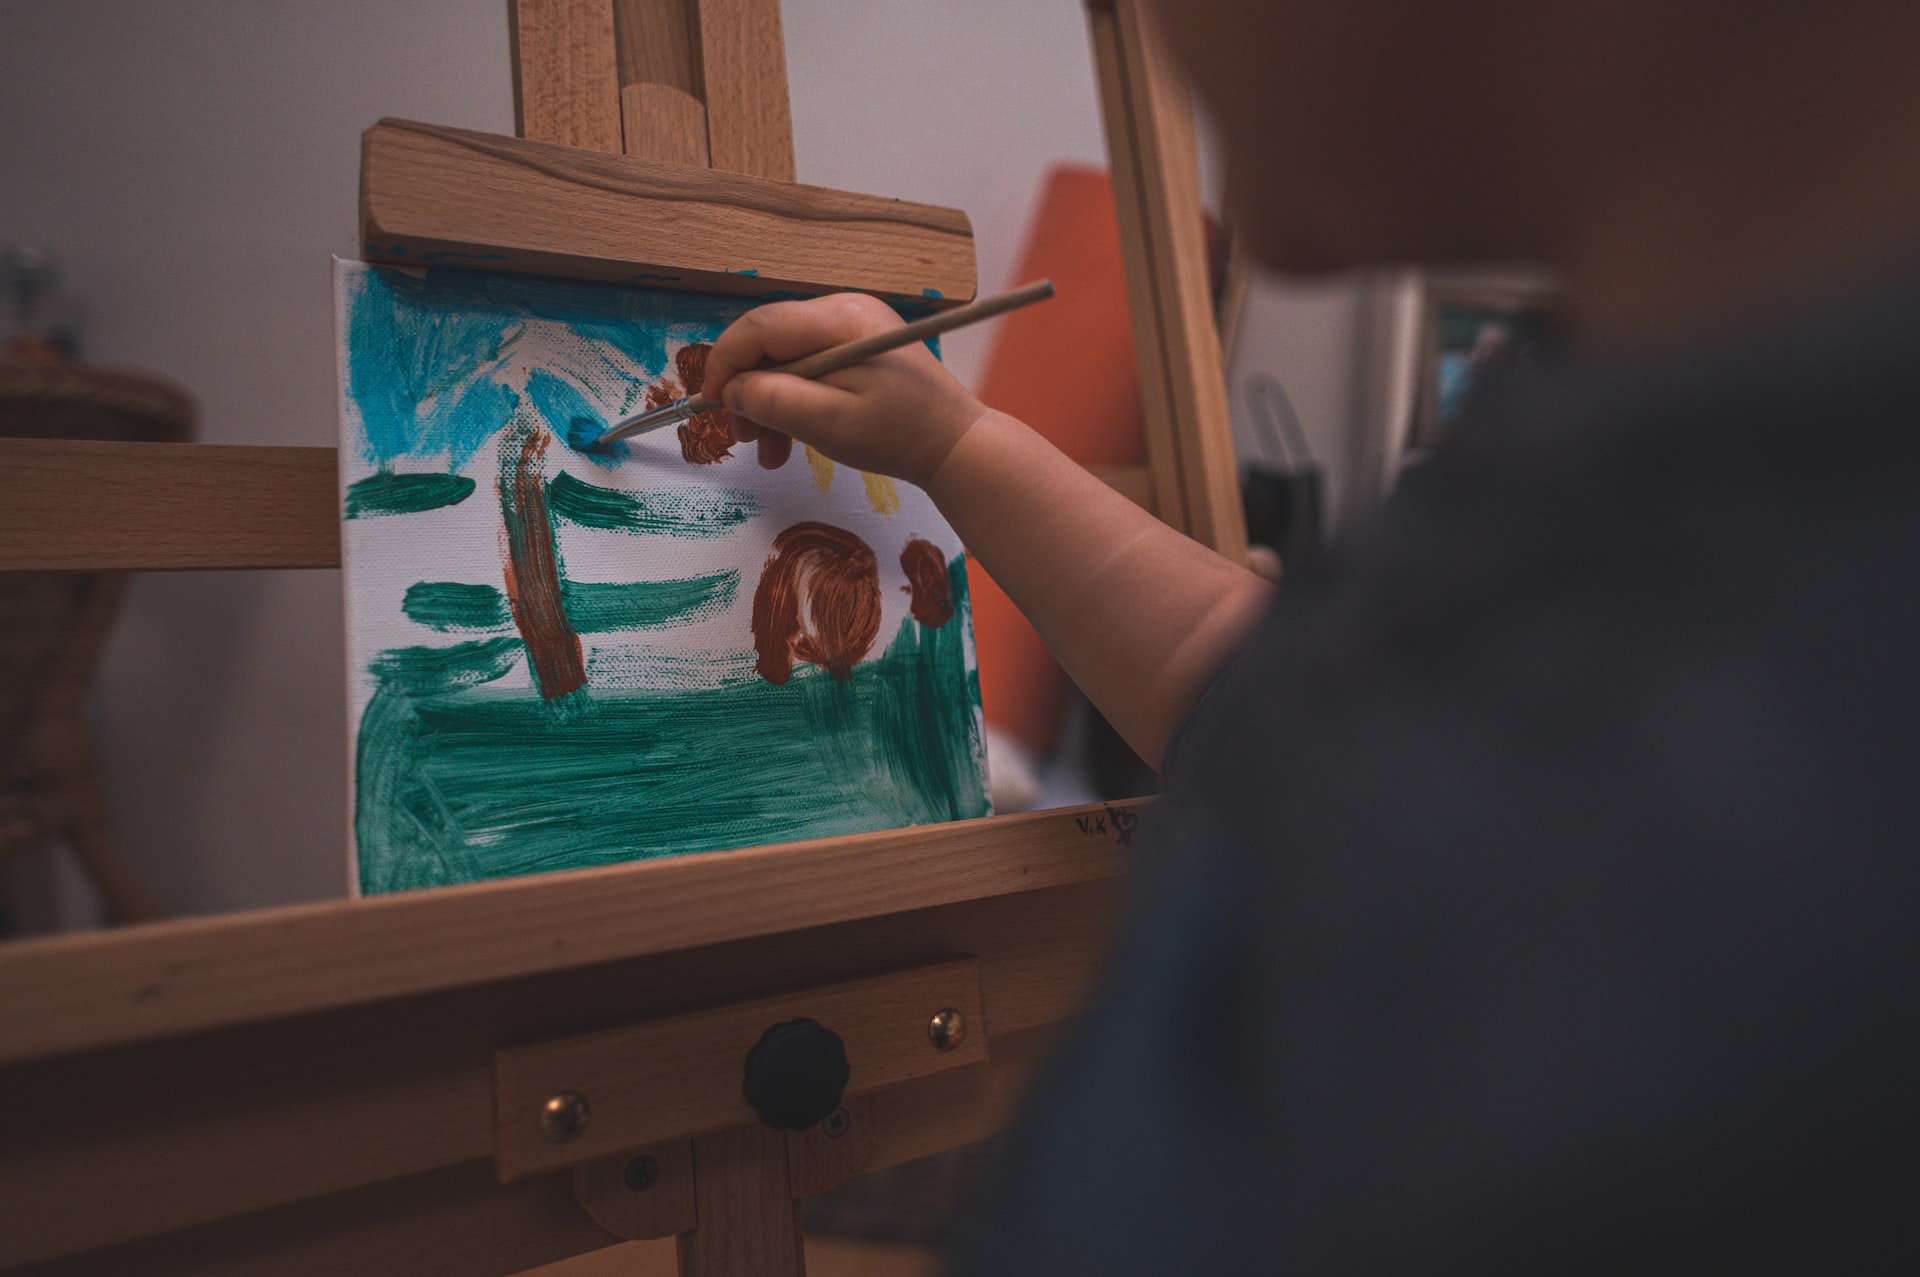 A hand painting on an easel